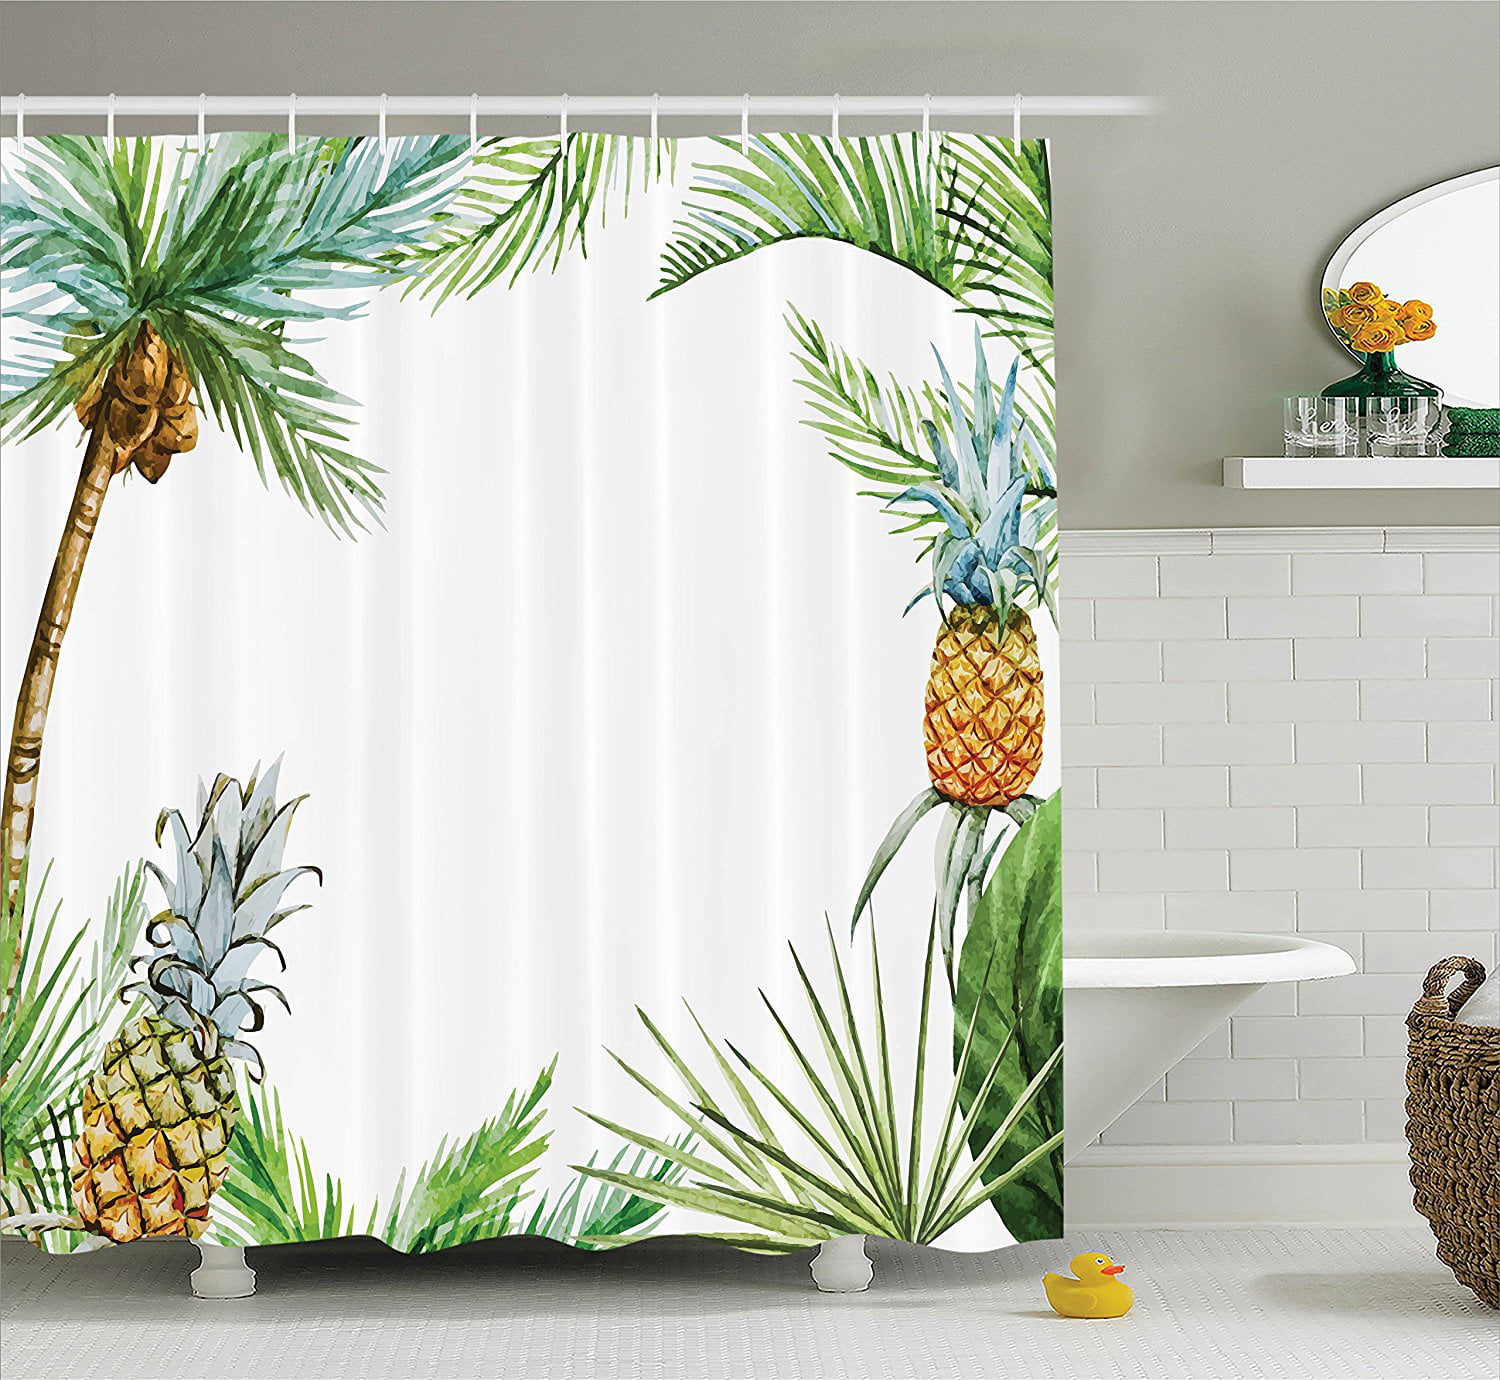 Details about   Pineapple Shower Curtain Hooks Bathroom Shower Curtain Hooks Bathroom Decor, 